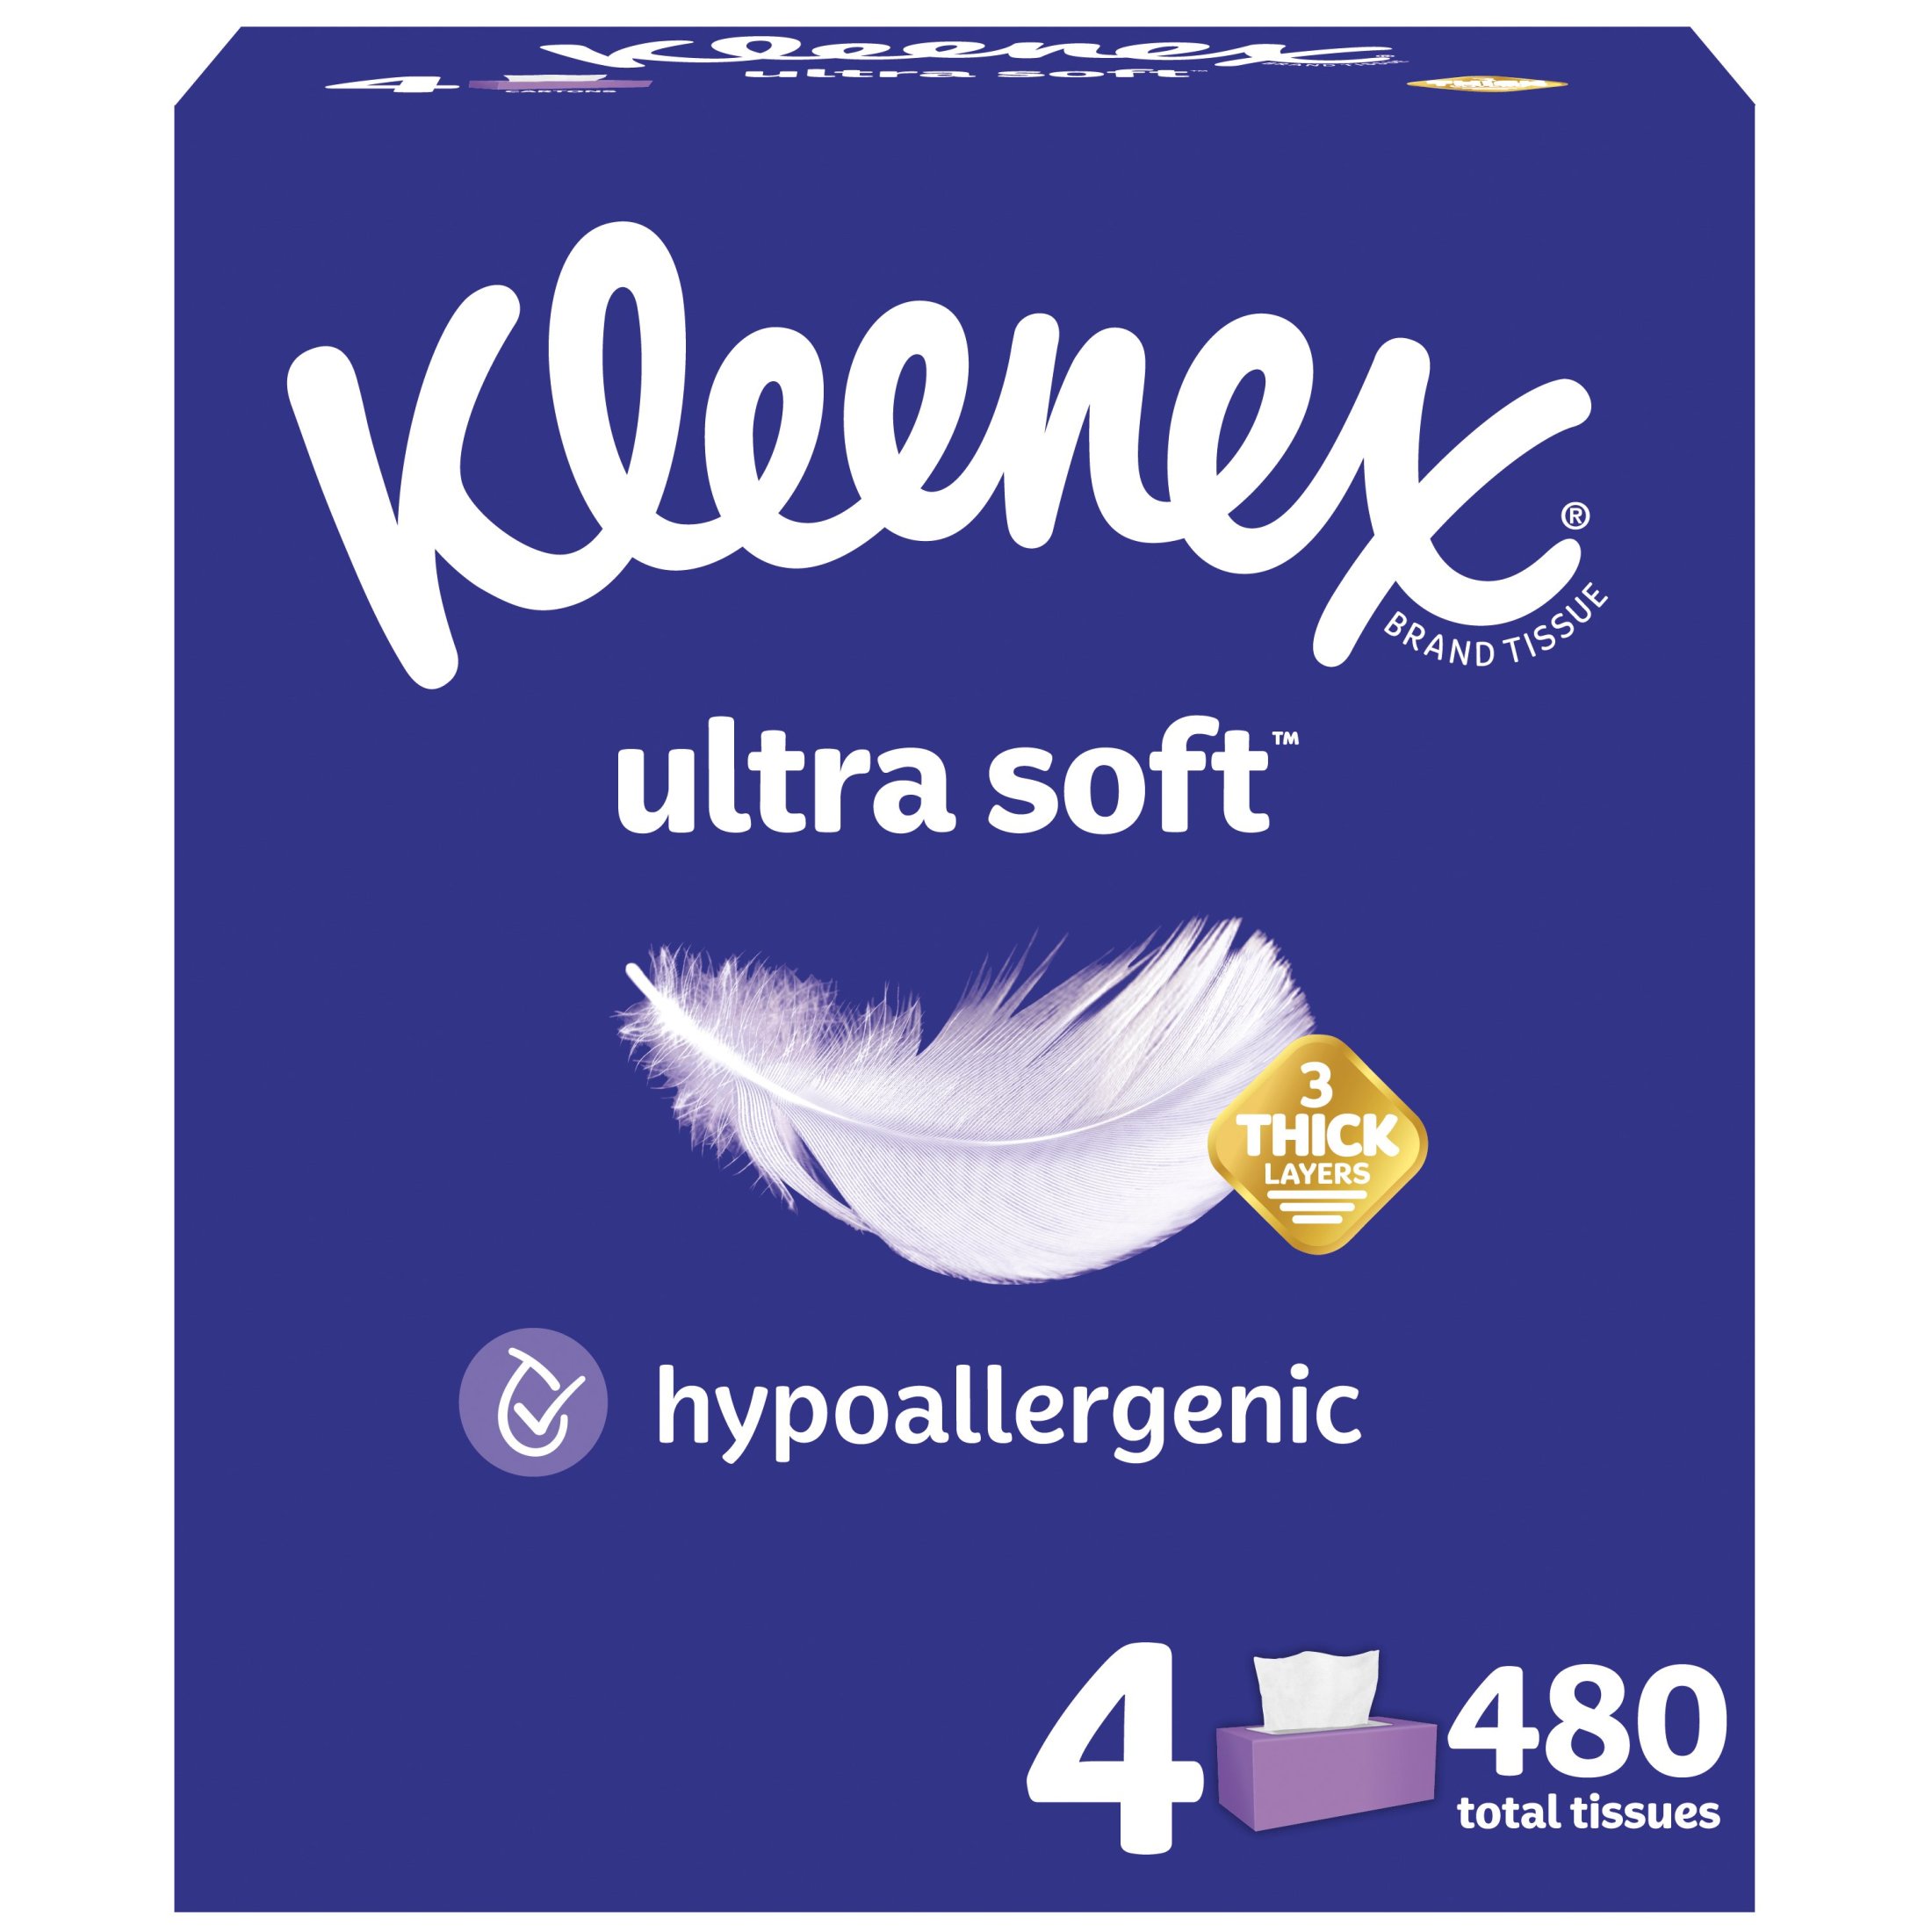 Kleenex Ultra Soft Facial Tissues, 4 Flat Boxes - image 1 of 12